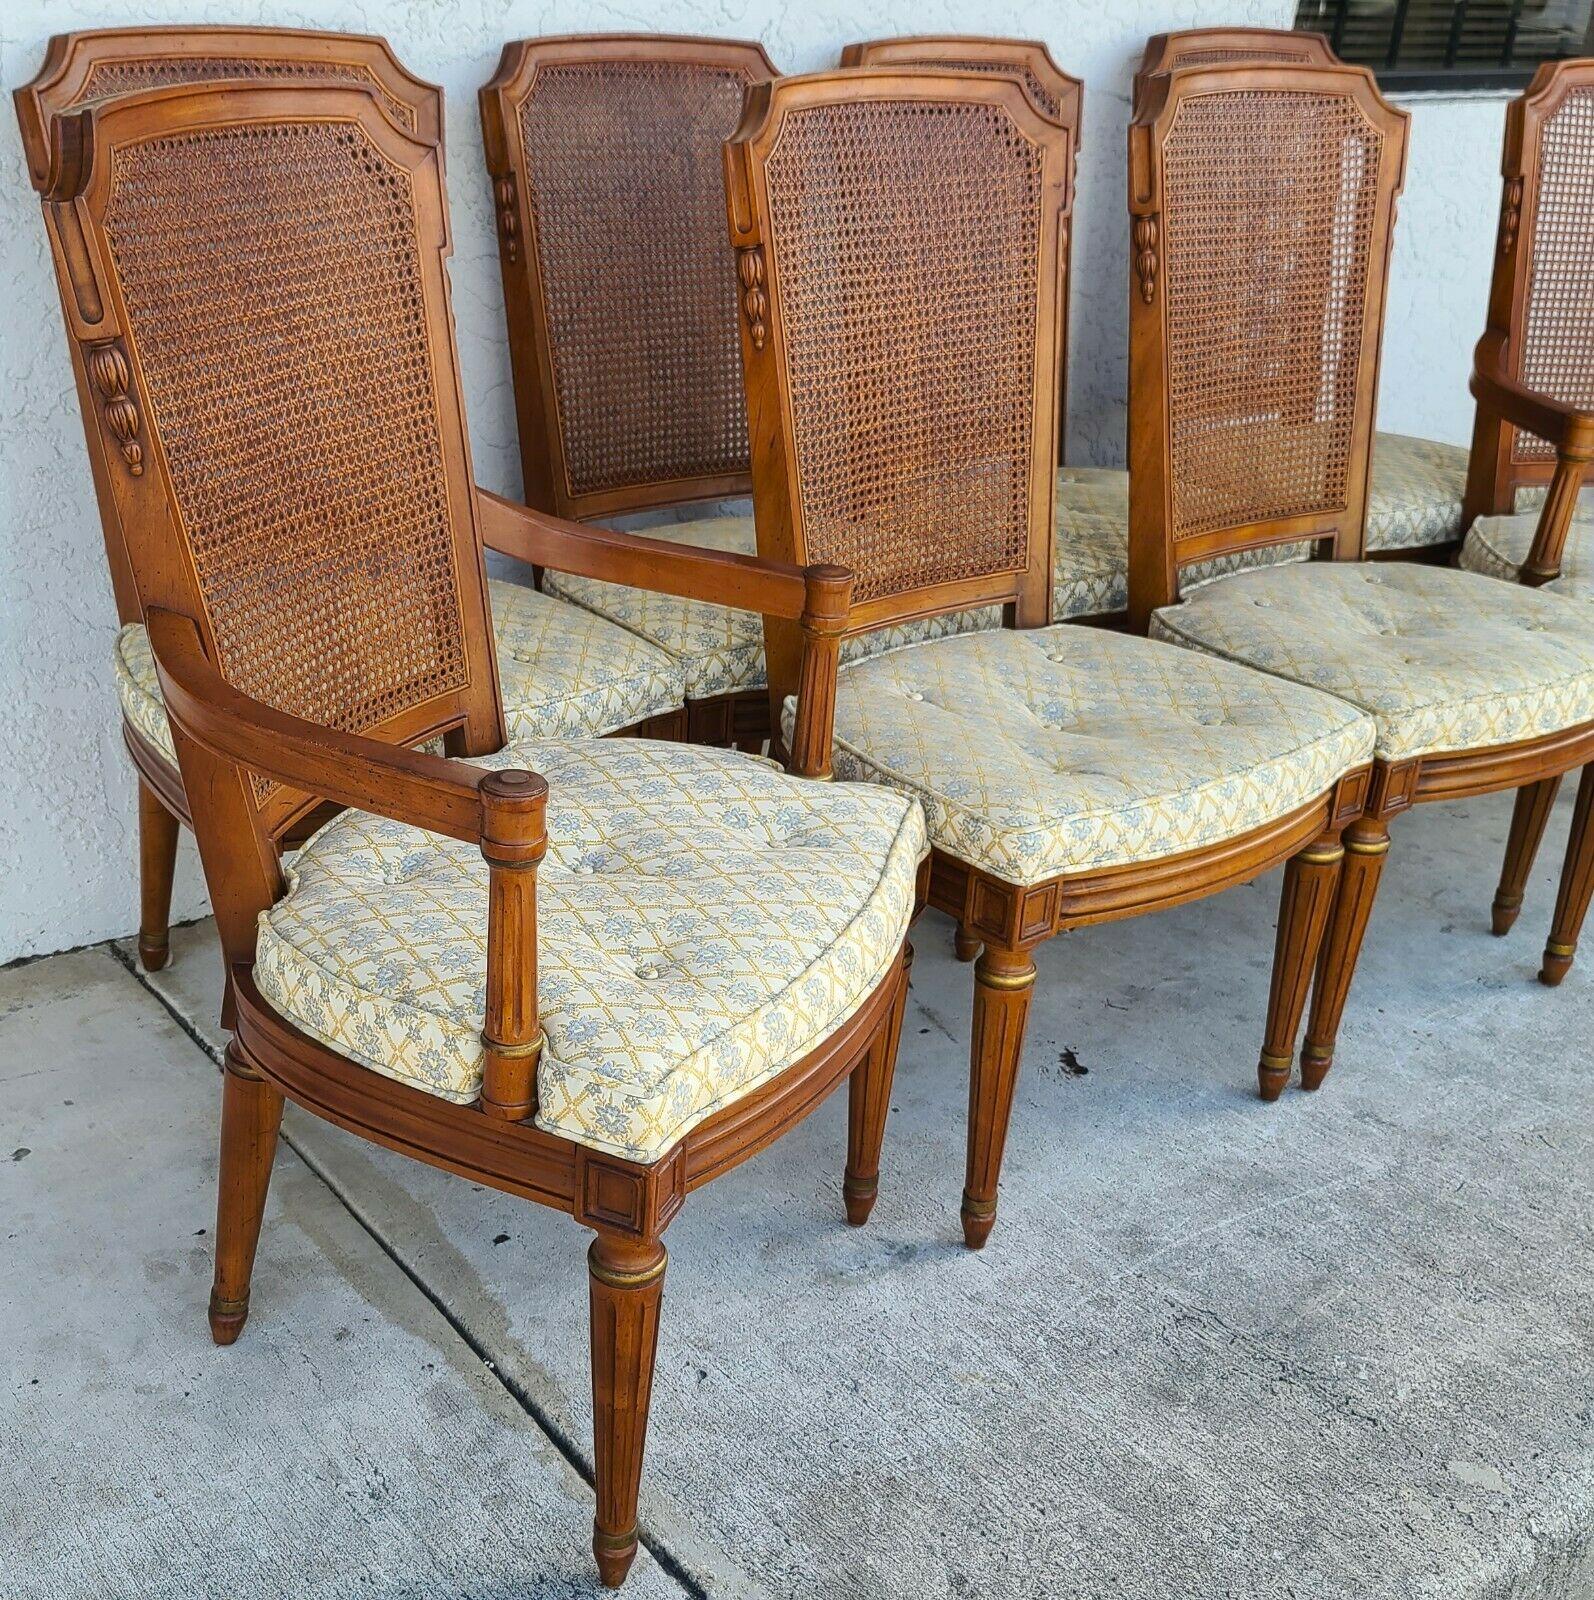 For FULL item description be sure to click on CONTINUE READING at the bottom of this listing.

Offering One Of Our Recent Palm Beach Estate Fine Furniture Acquisitions Of A
Set of 8 Vintage HENREDON Italian Style Cane Back Dining Chairs 
Set